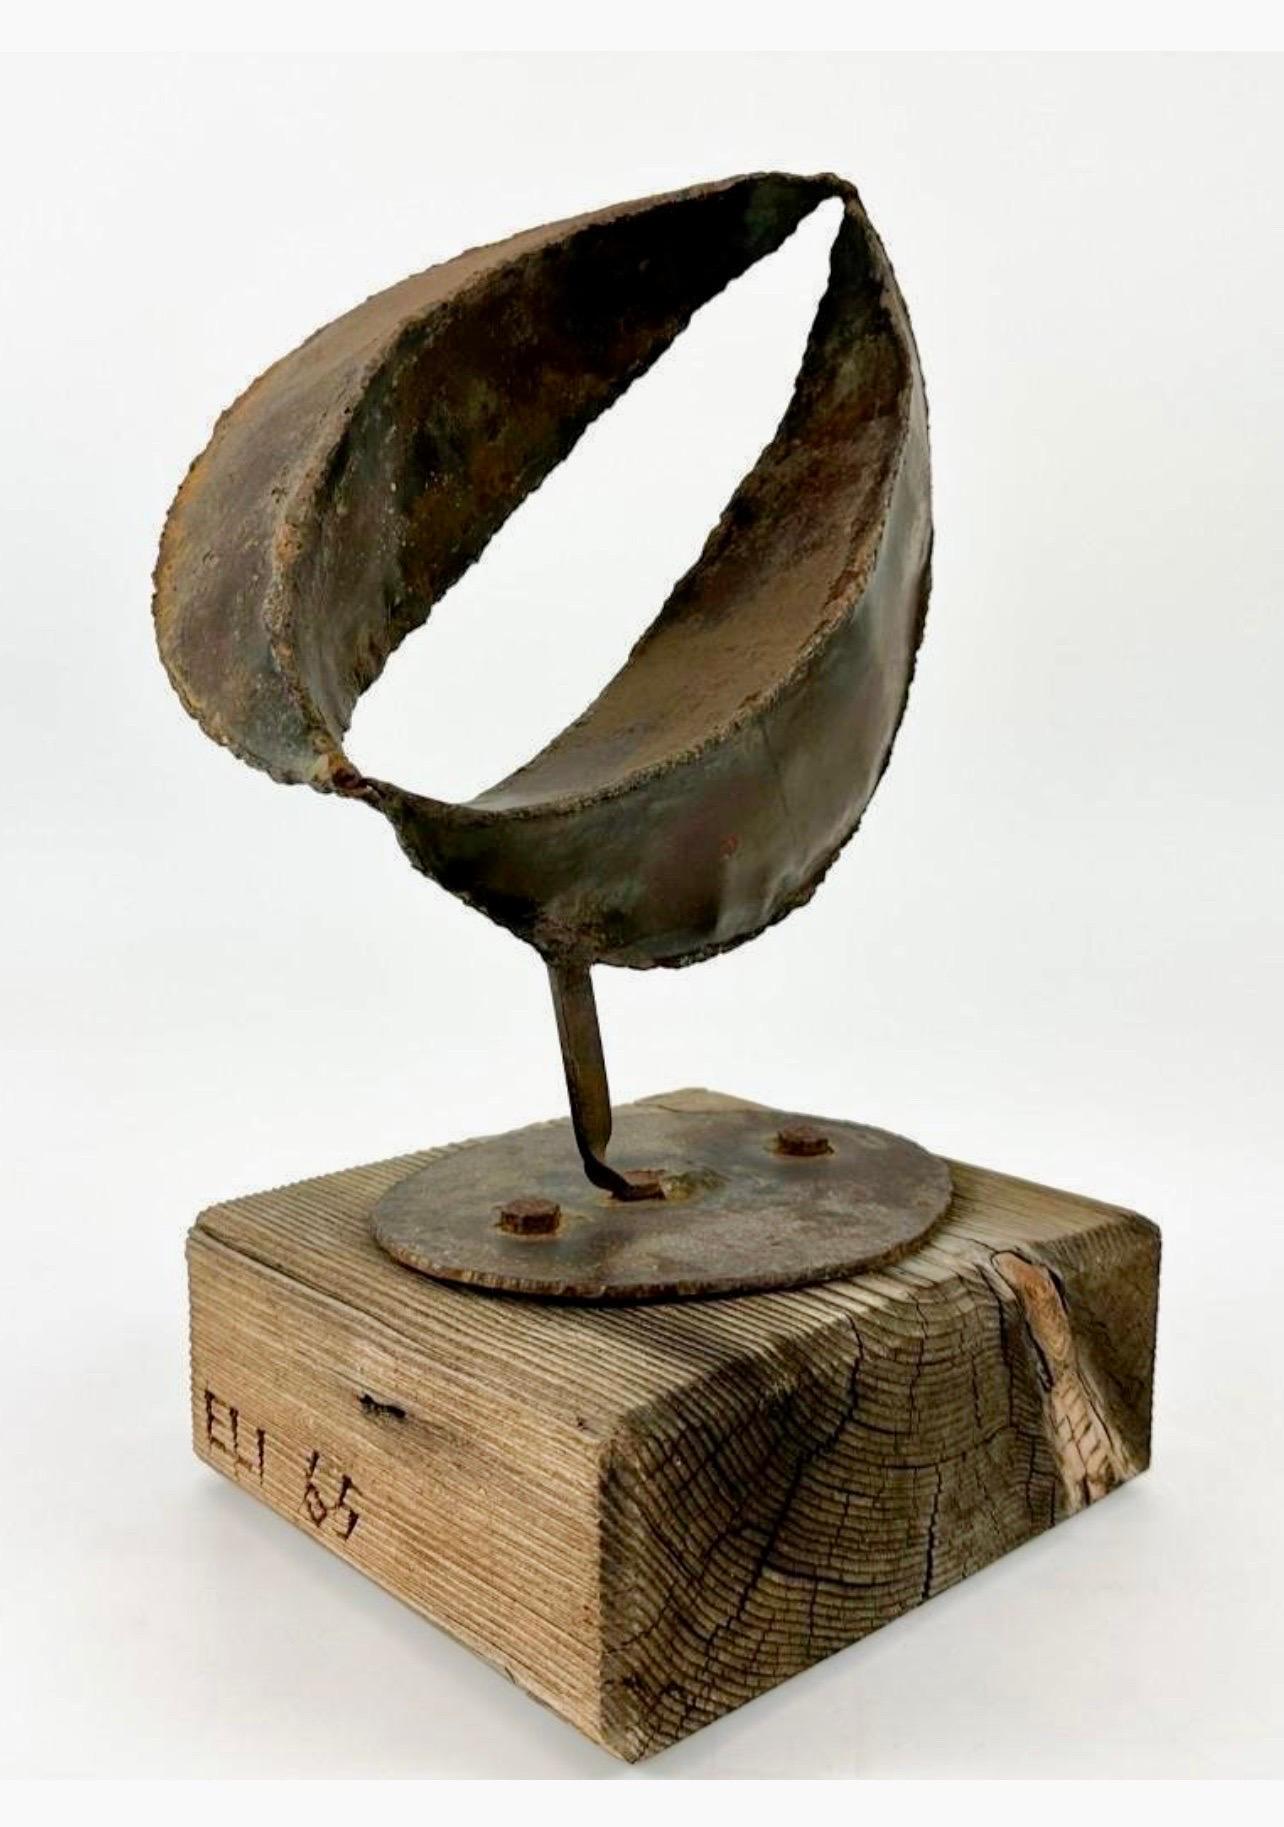 Eli Ilan (אלי אילן), 1928-1982 was an Israeli sculptor.
Abstract organic pod shape. in either steel or iron mounted on a wooden plinth.
Ilan was born in Winnipeg, Manitoba. He enrolled in a premedical curriculum at the University of British Columbia